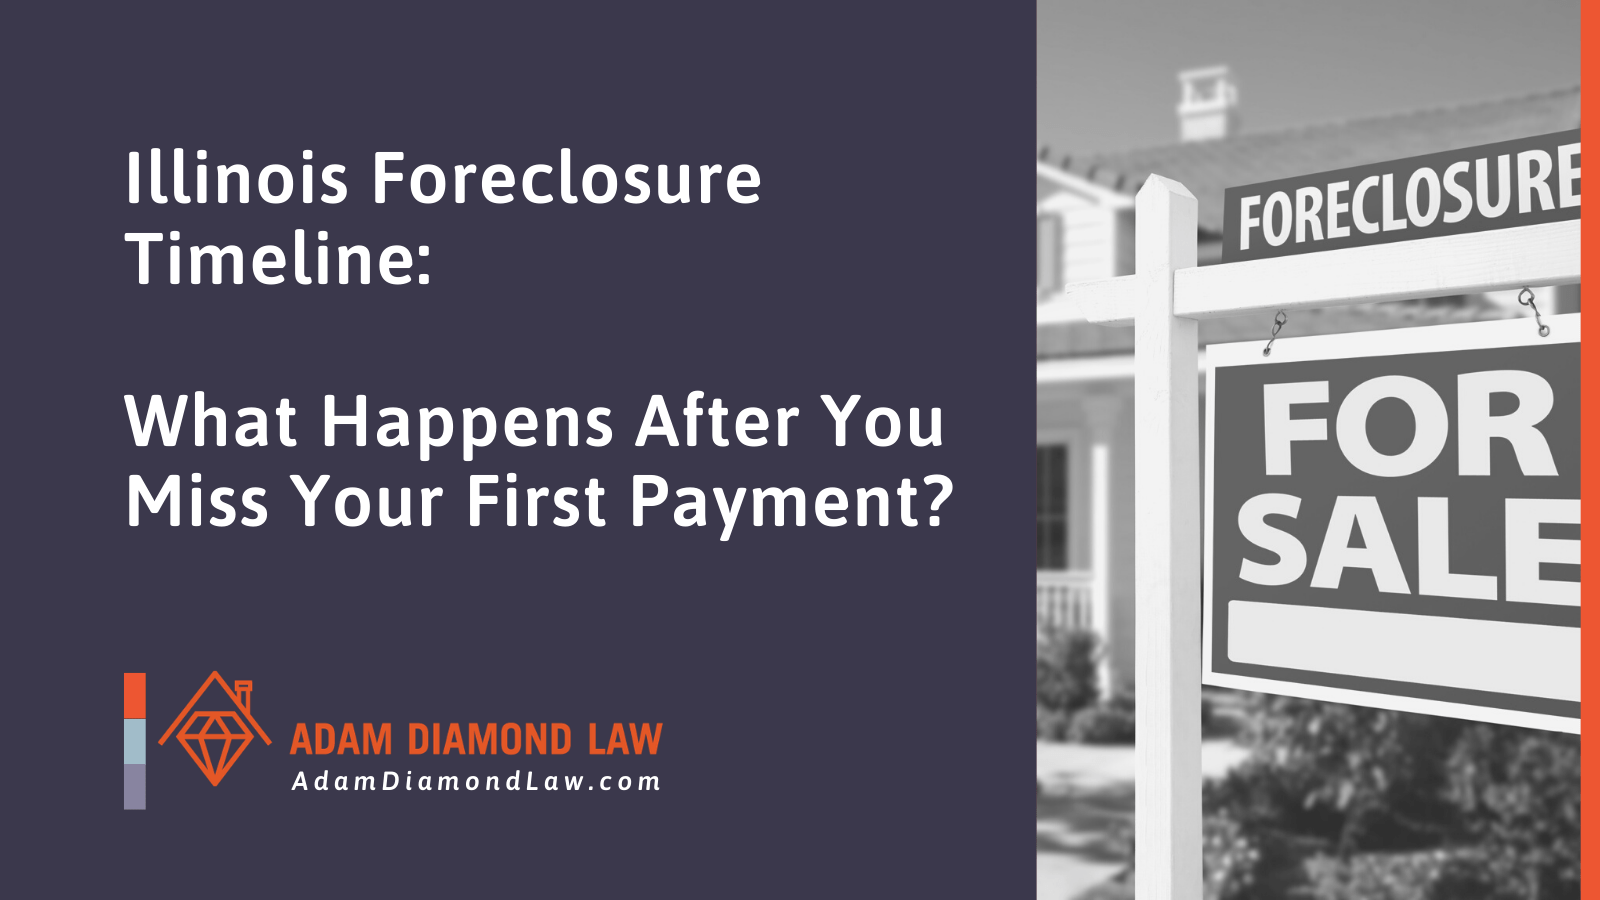 What Happens After You Miss Your First Foreclosure Payment in Illinois - Adam Diamond Law | McHenry, IL Residential Real Estate Lawyer